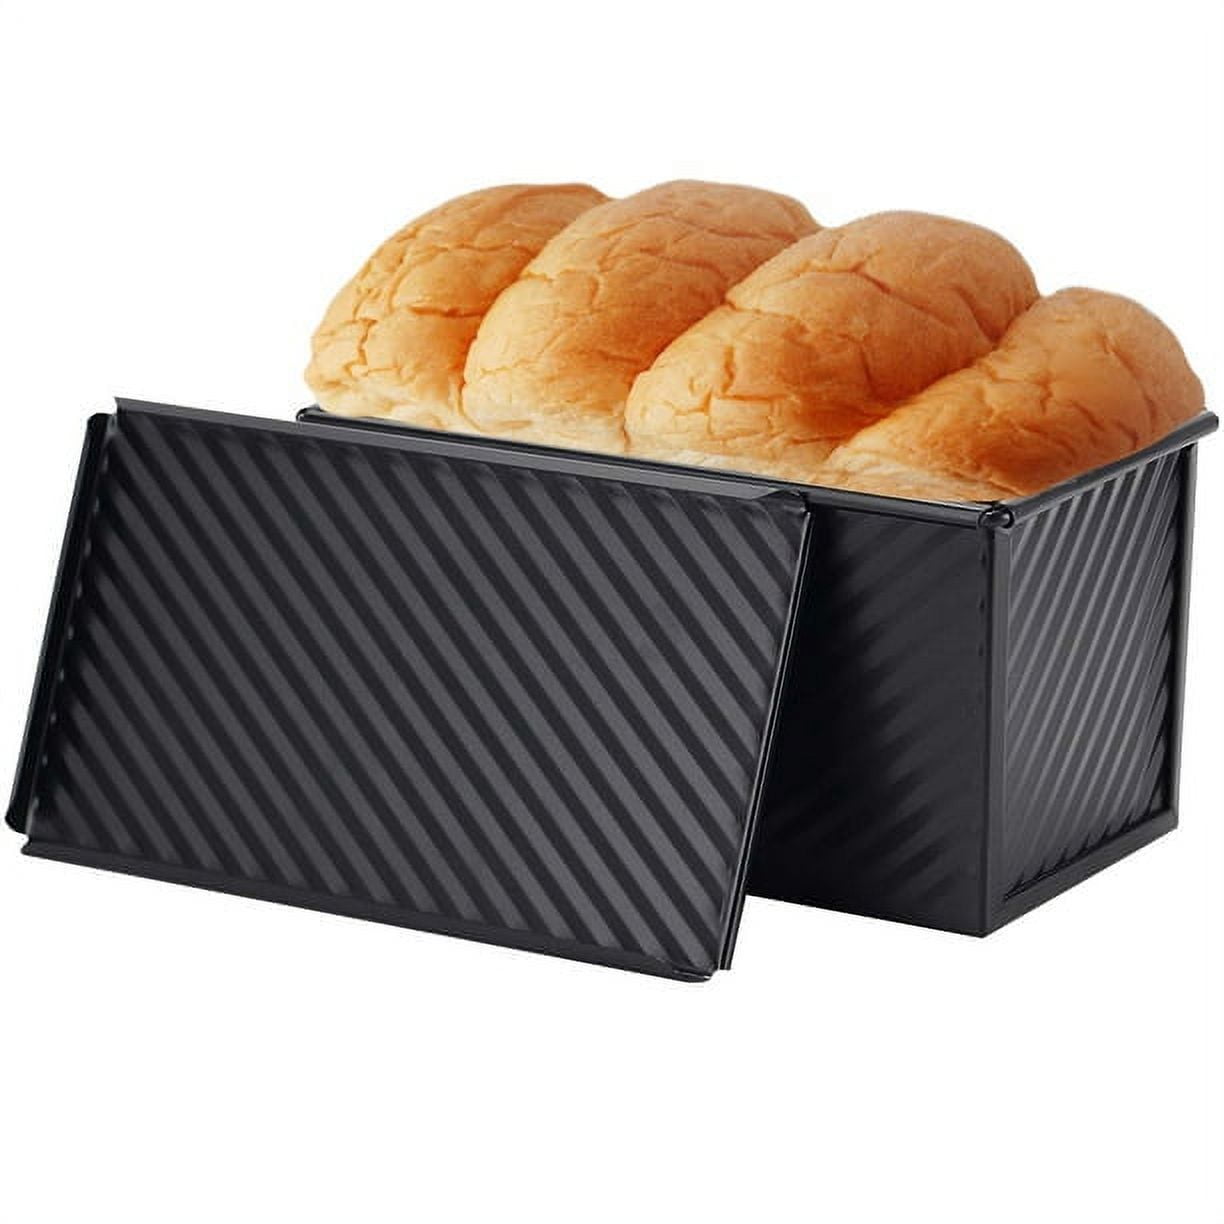 USA Pans Pullman Loaf & Cover large 13 x 4 x 4